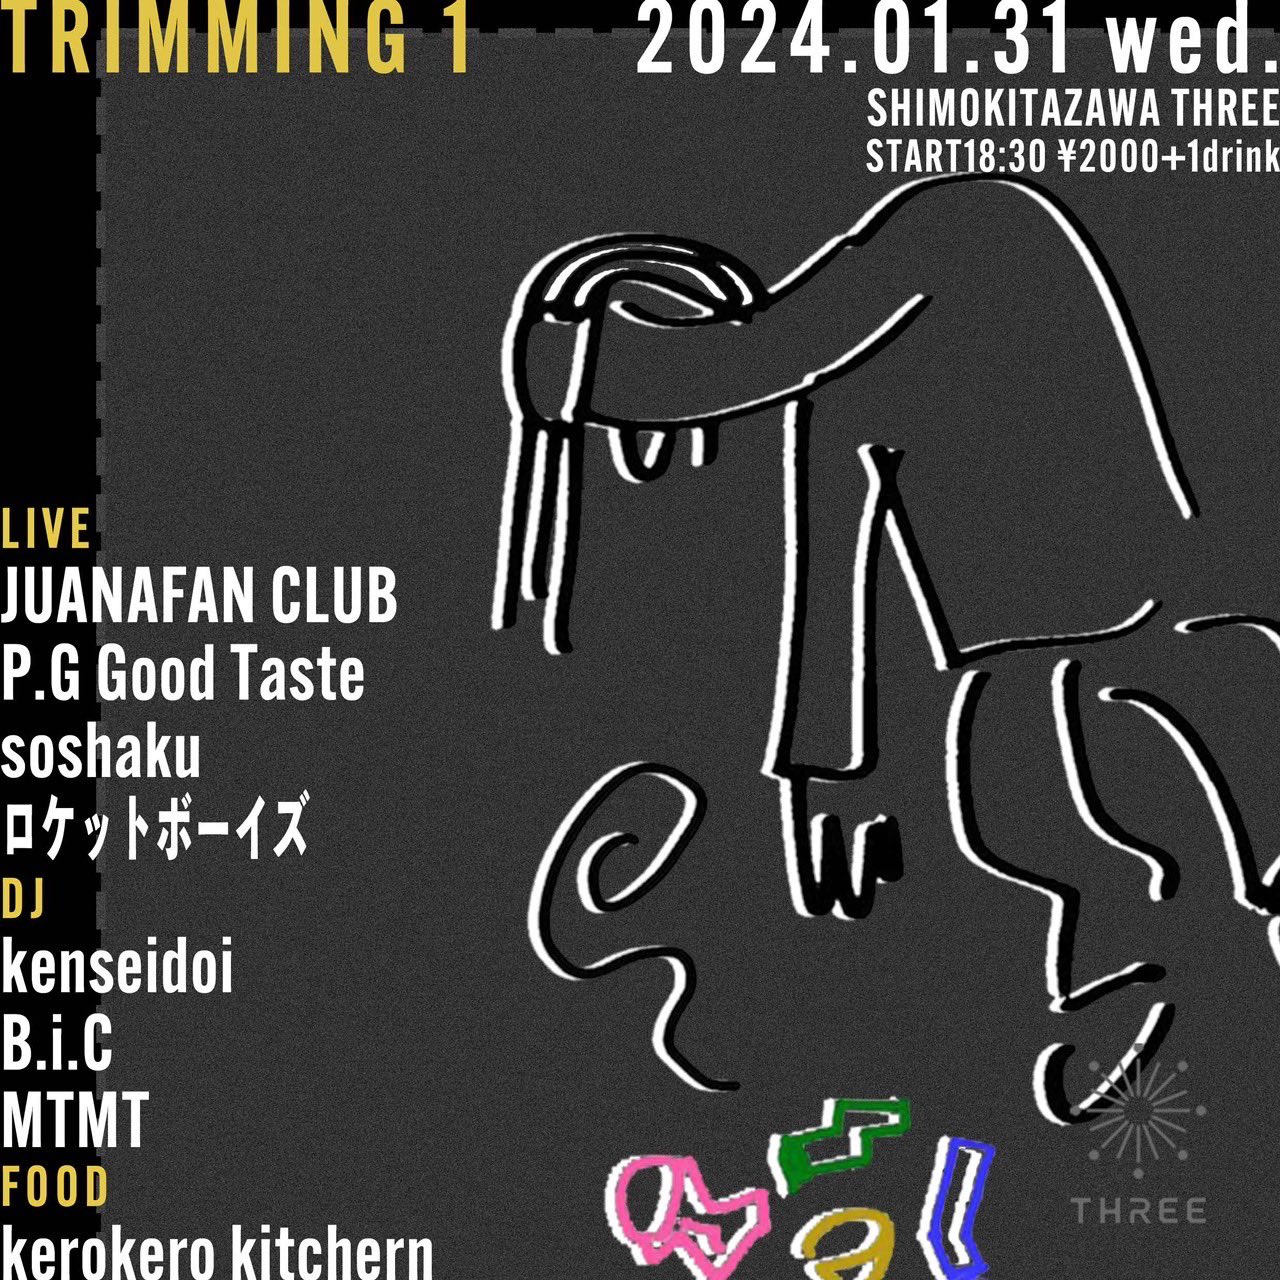 【live】TRIMMING 1/31(wed)